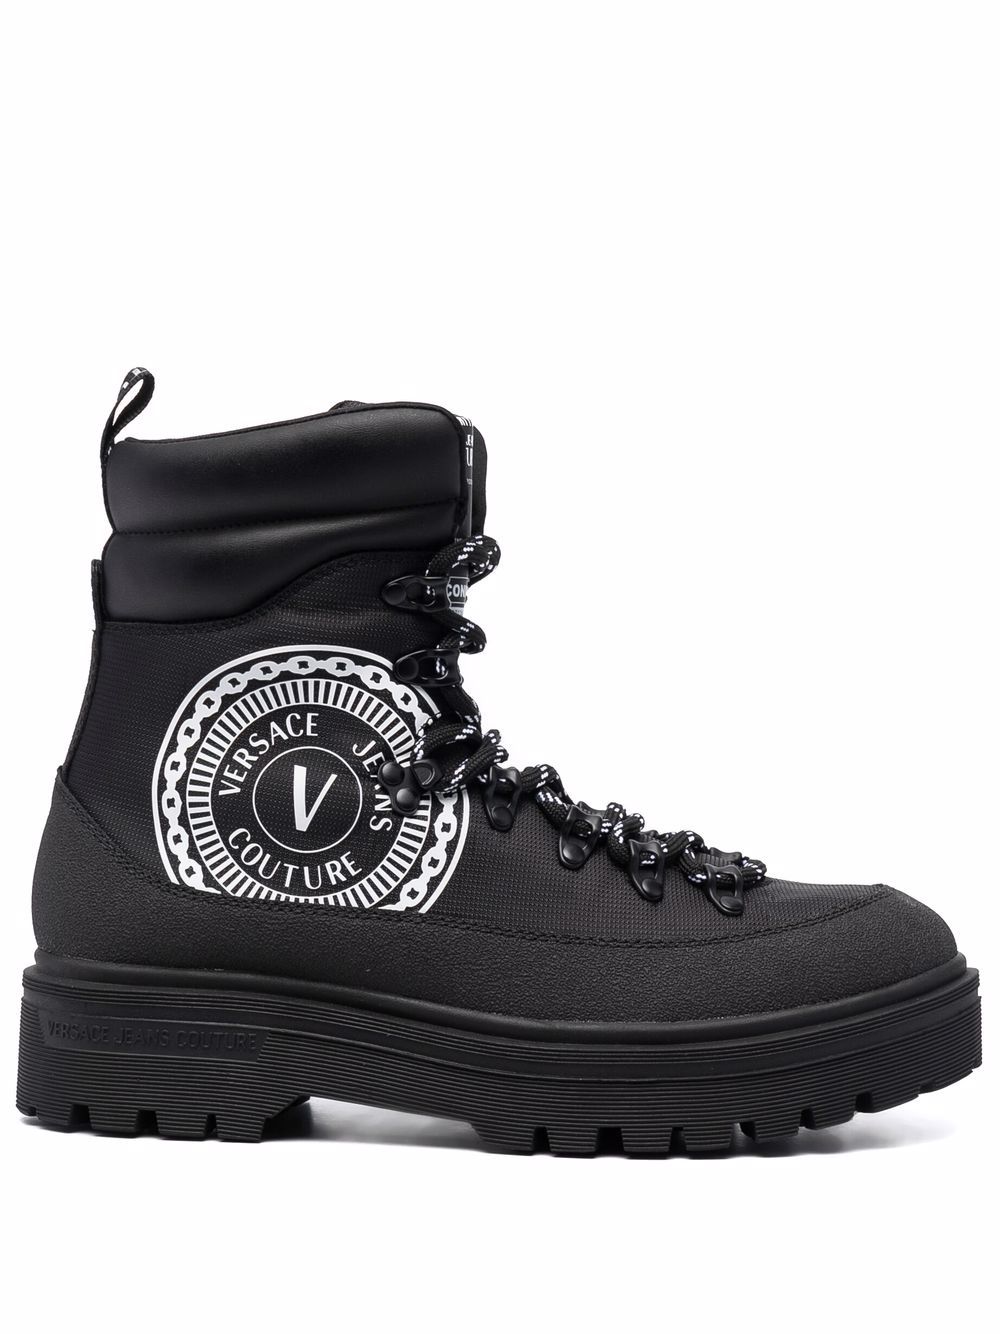 ＜Farfetch＞ ★20%OFF！Versace Jeans Couture レースアップ ブーツ - ブラック